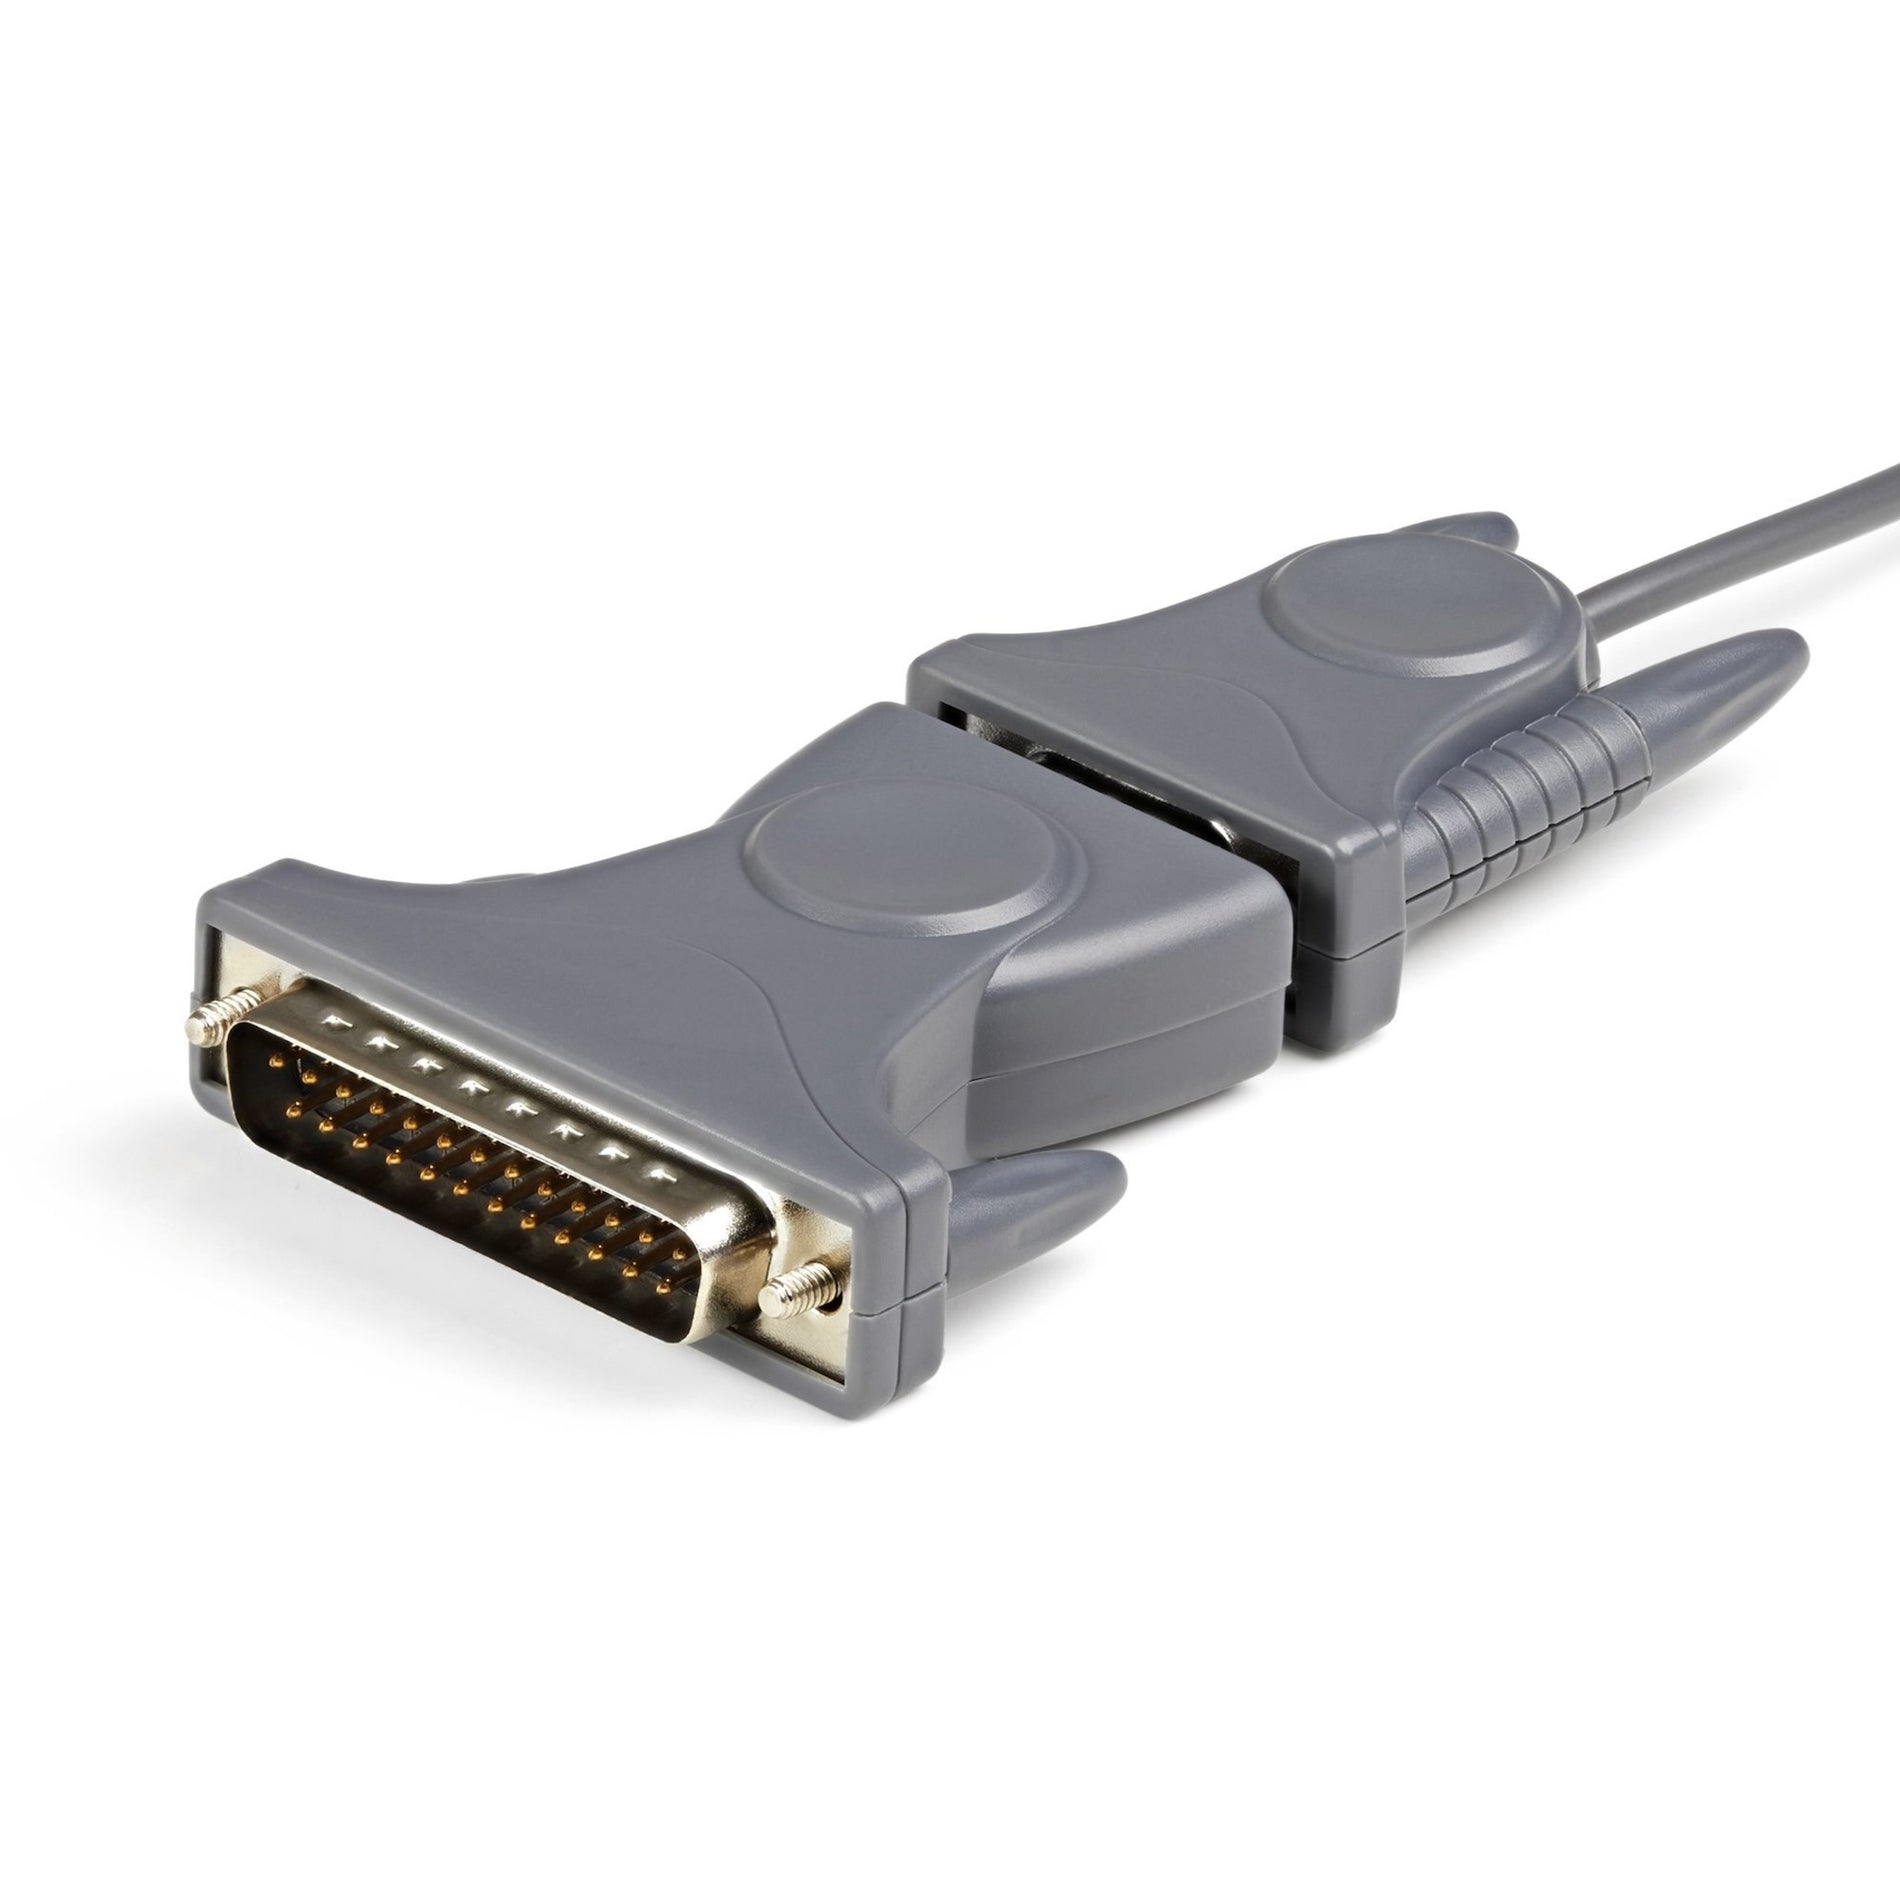 StarTech.com ICUSB232DB25 USB to RS232 DB9/DB25 Serial Adapter Cable - M/M, 3 ft, Gray